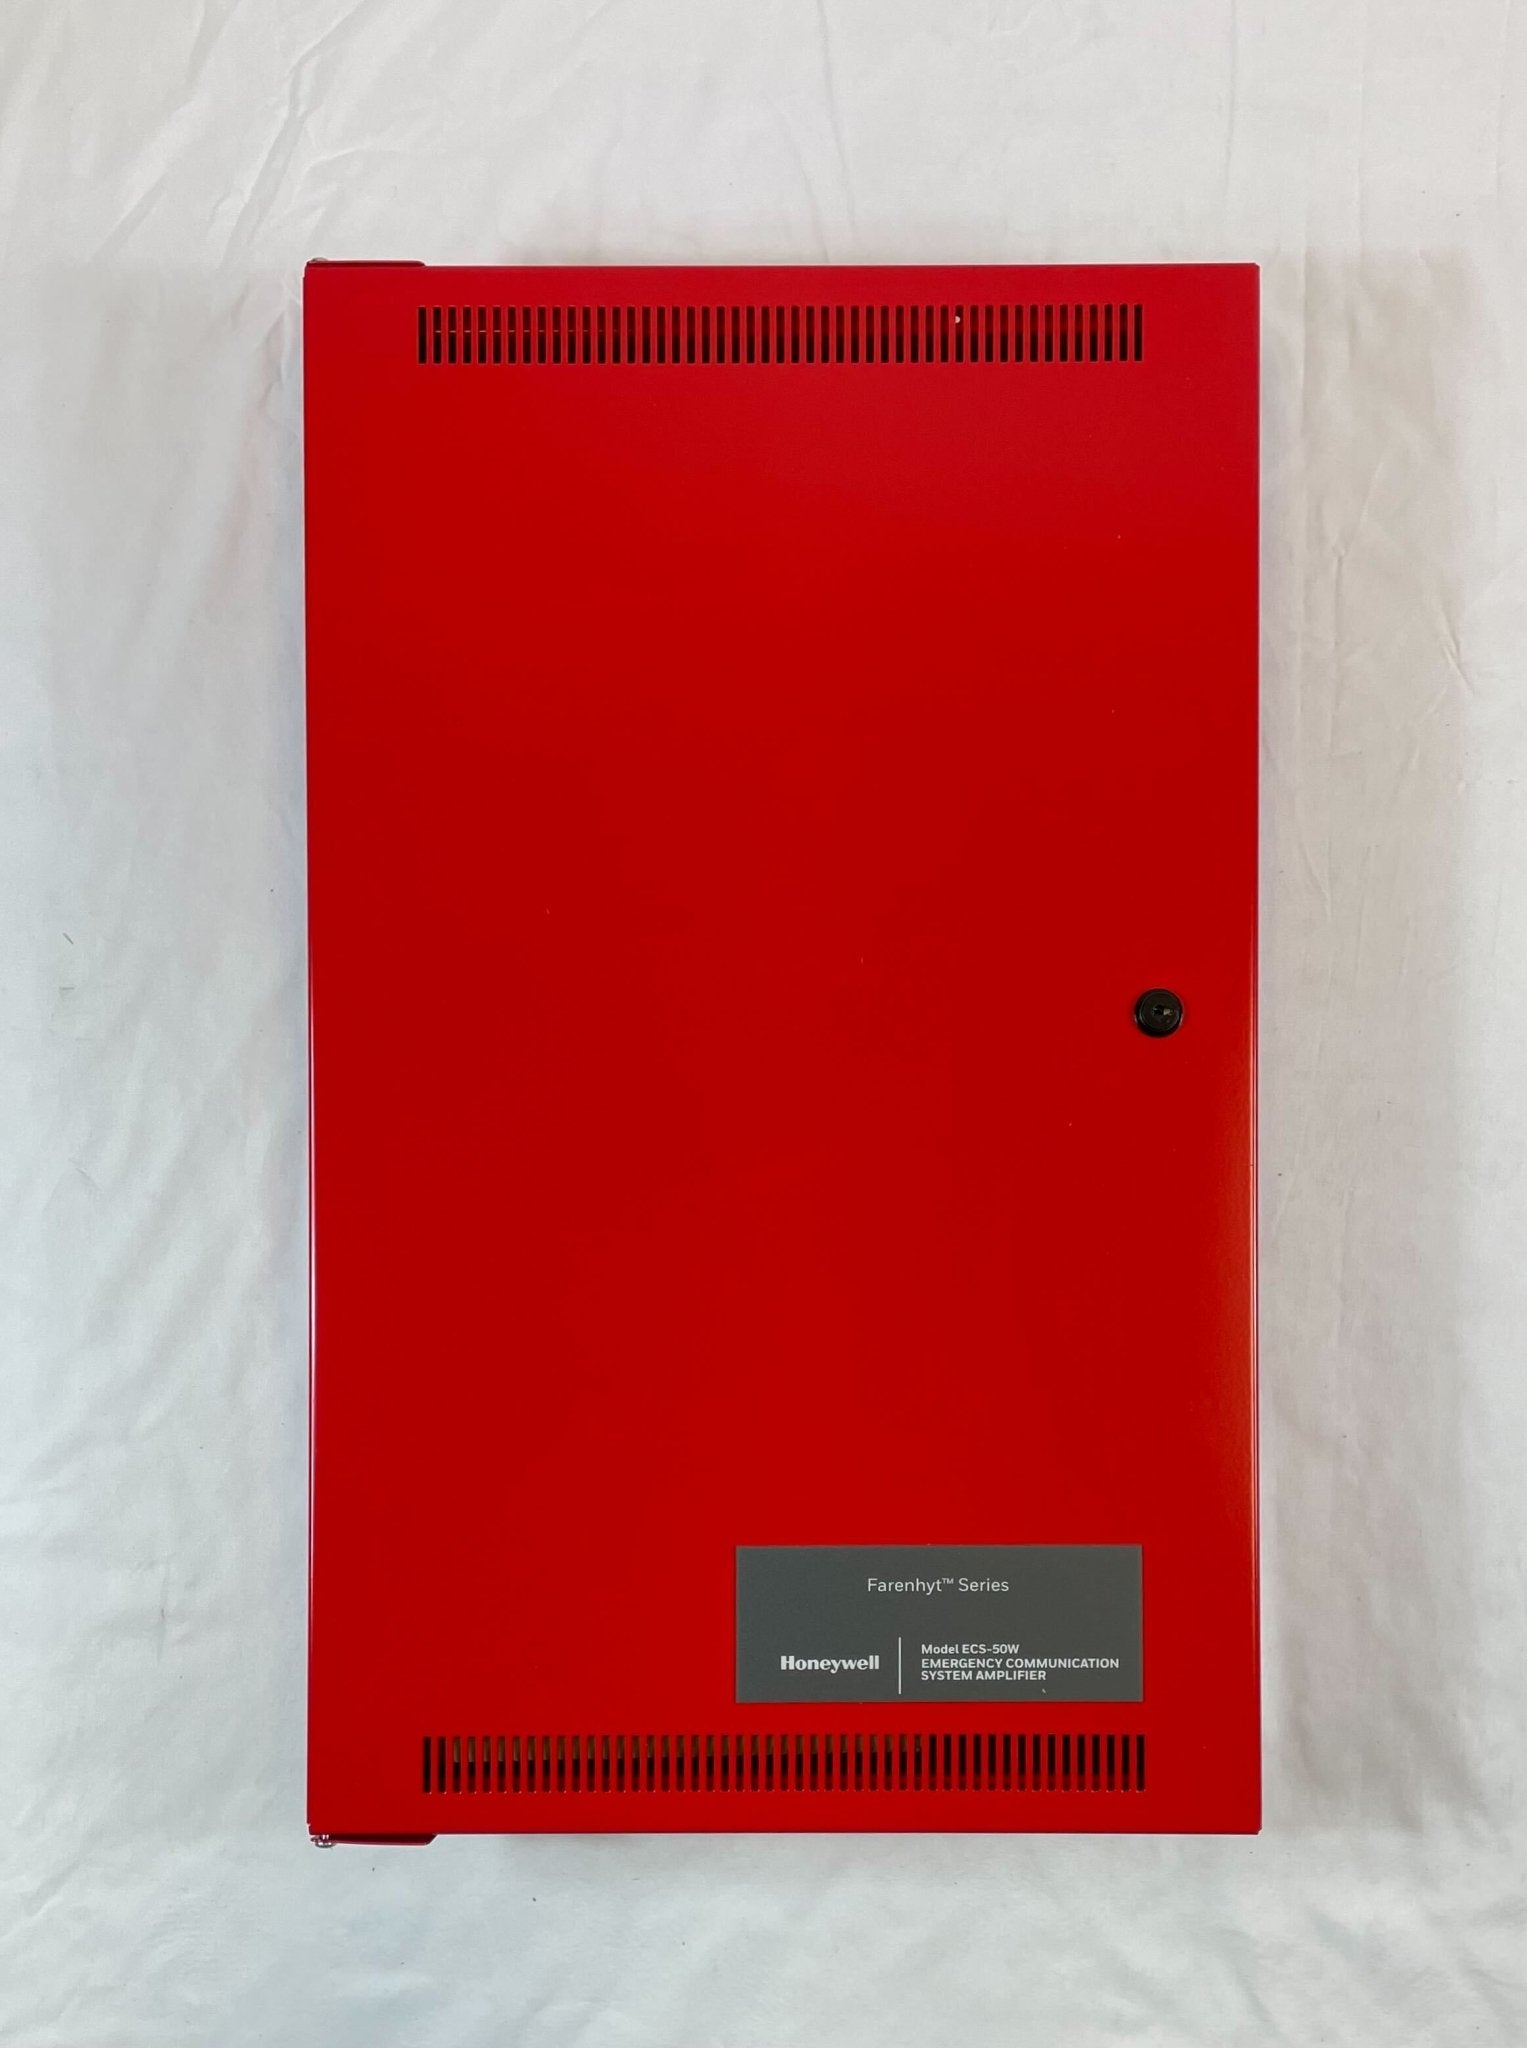 Silent Knight ECS-50WHV - The Fire Alarm Supplier